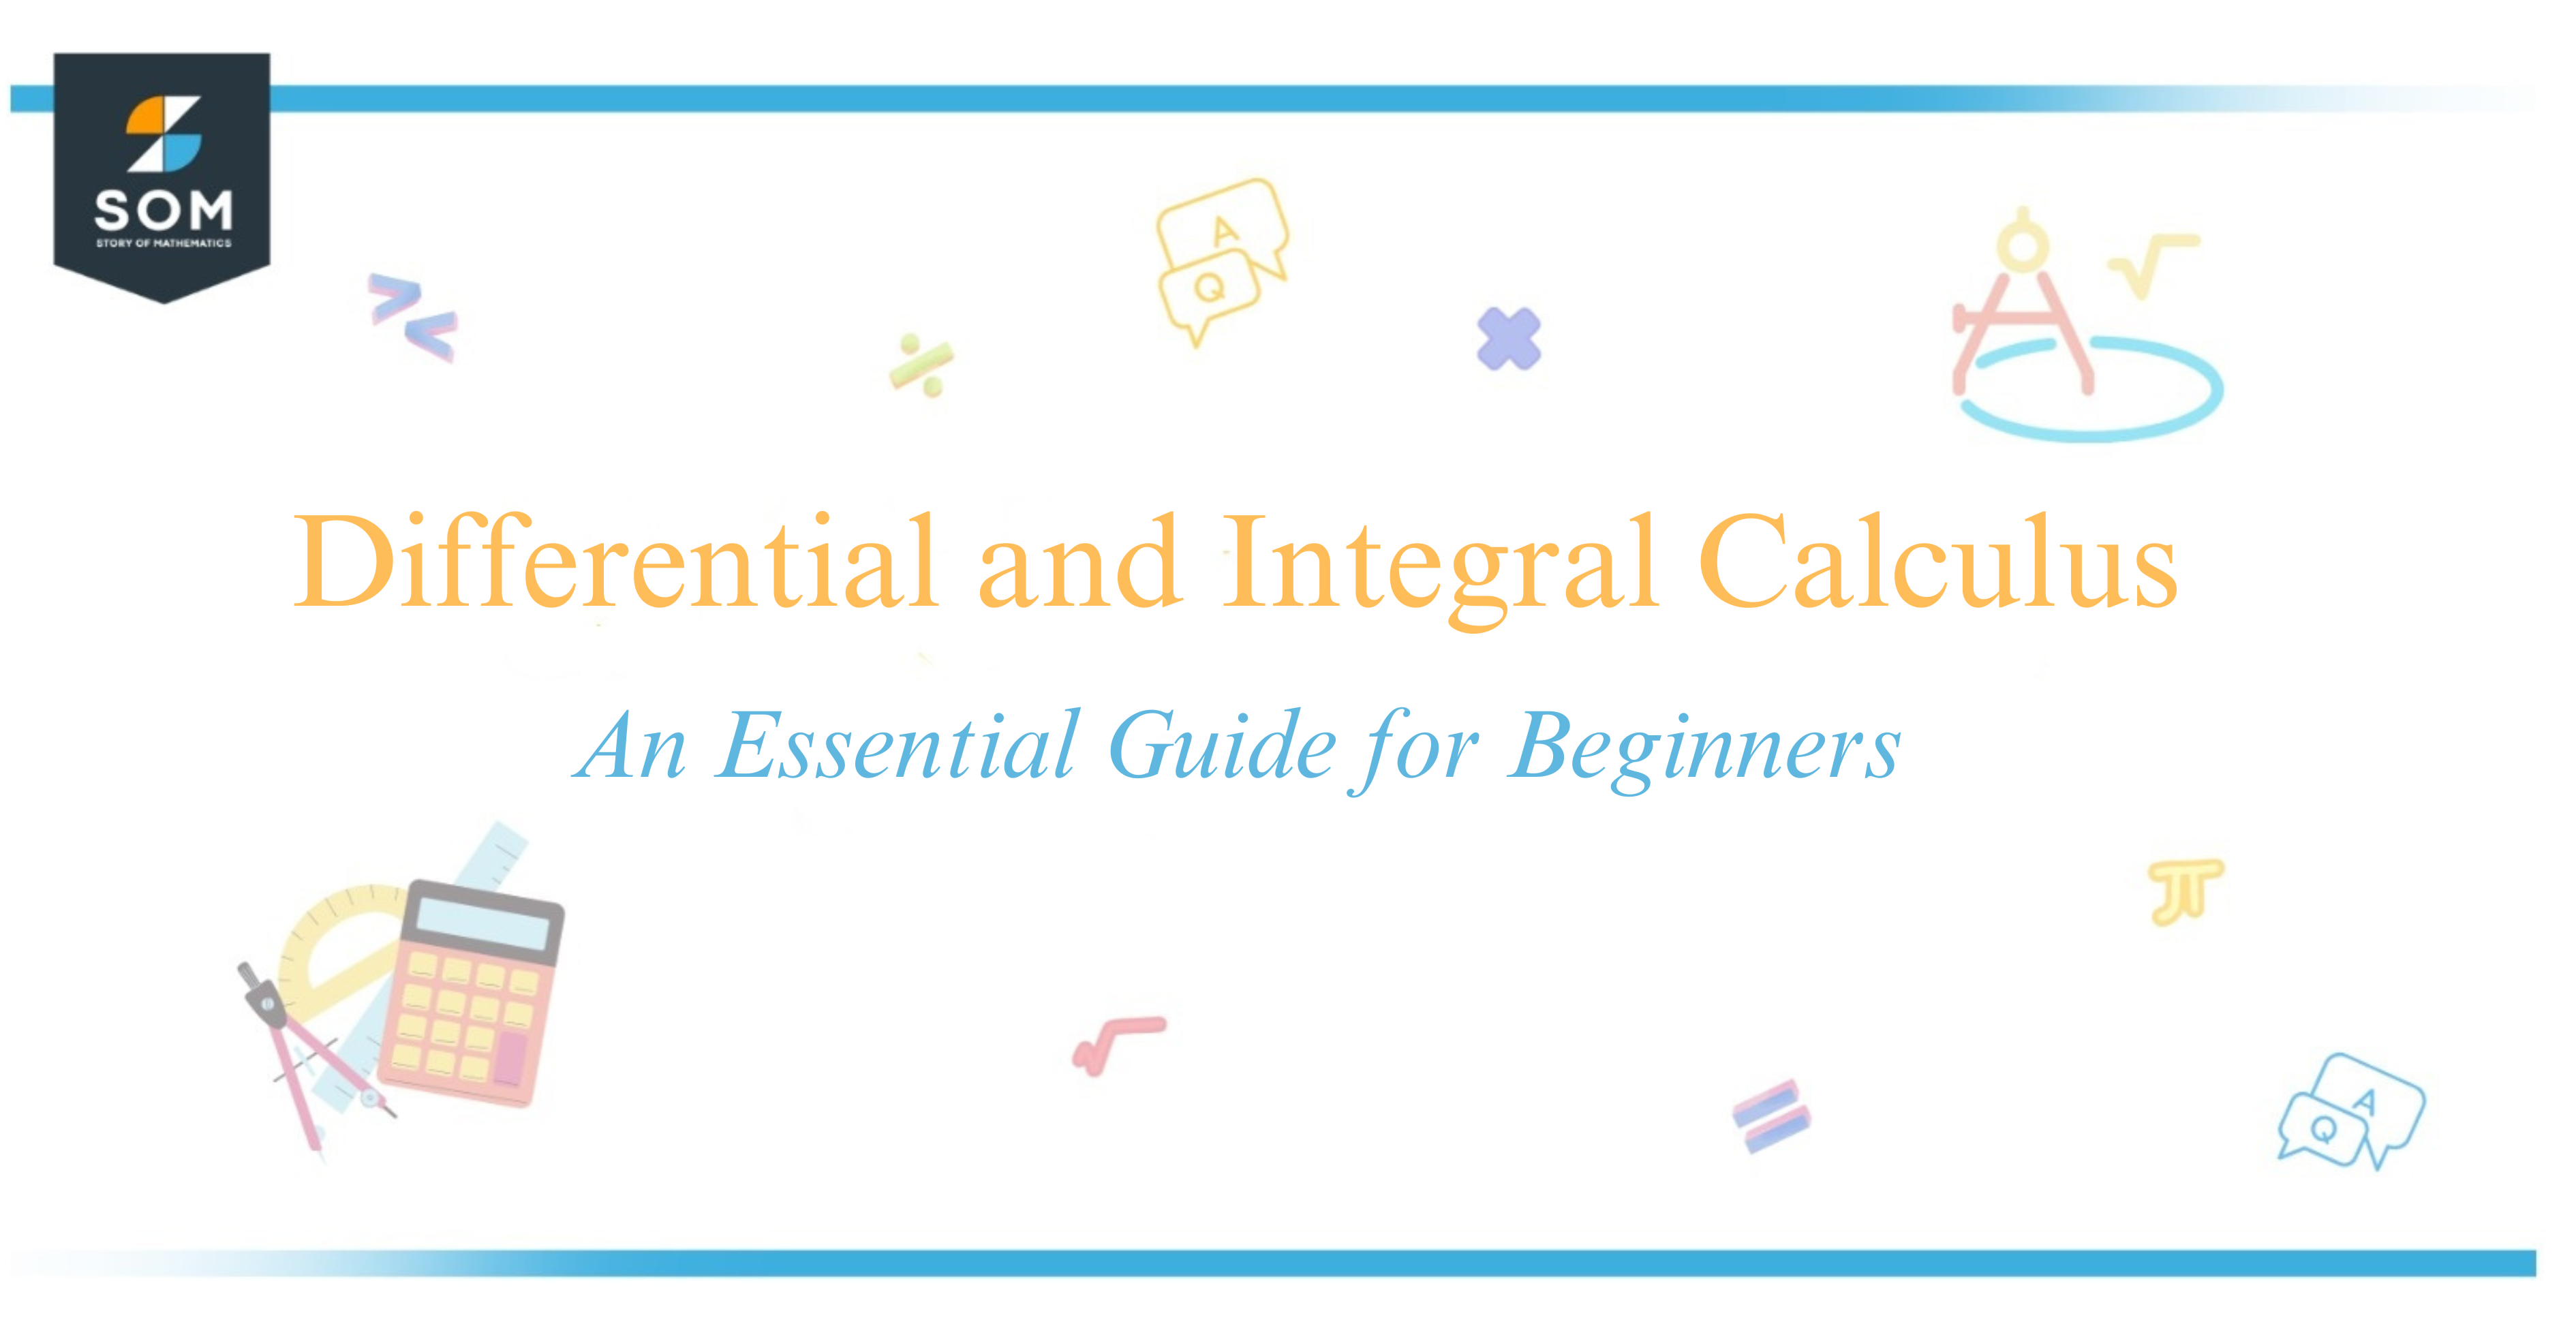 Differential and Integral Calculus An Essential Guide for Beginners